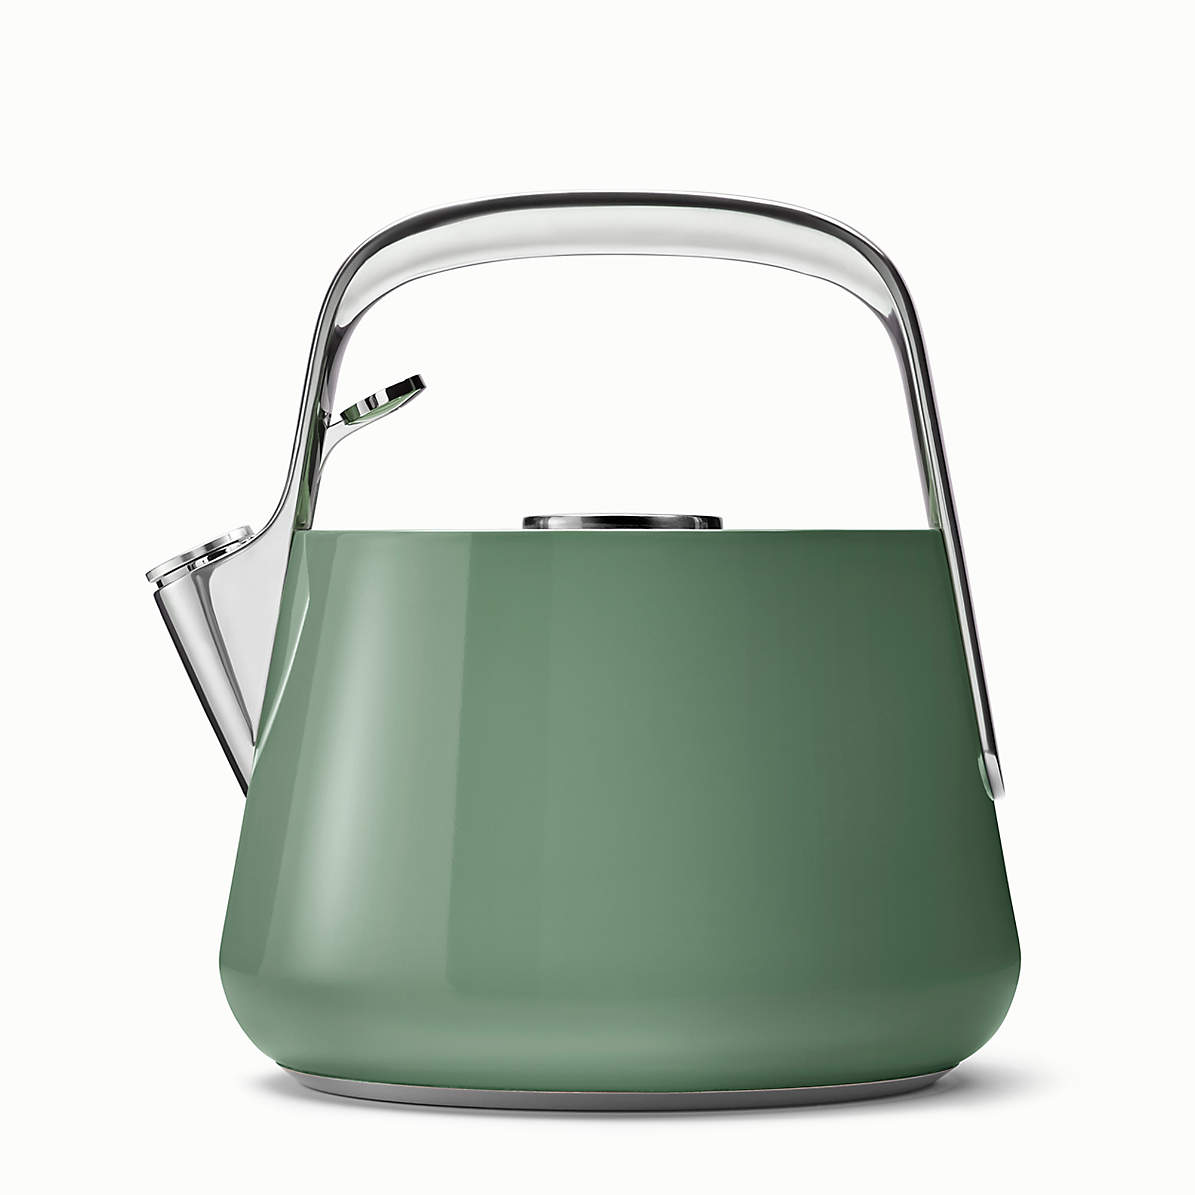 Caraway Whistling Tea Kettle sale: Save an extra 20% on this cookware  staple